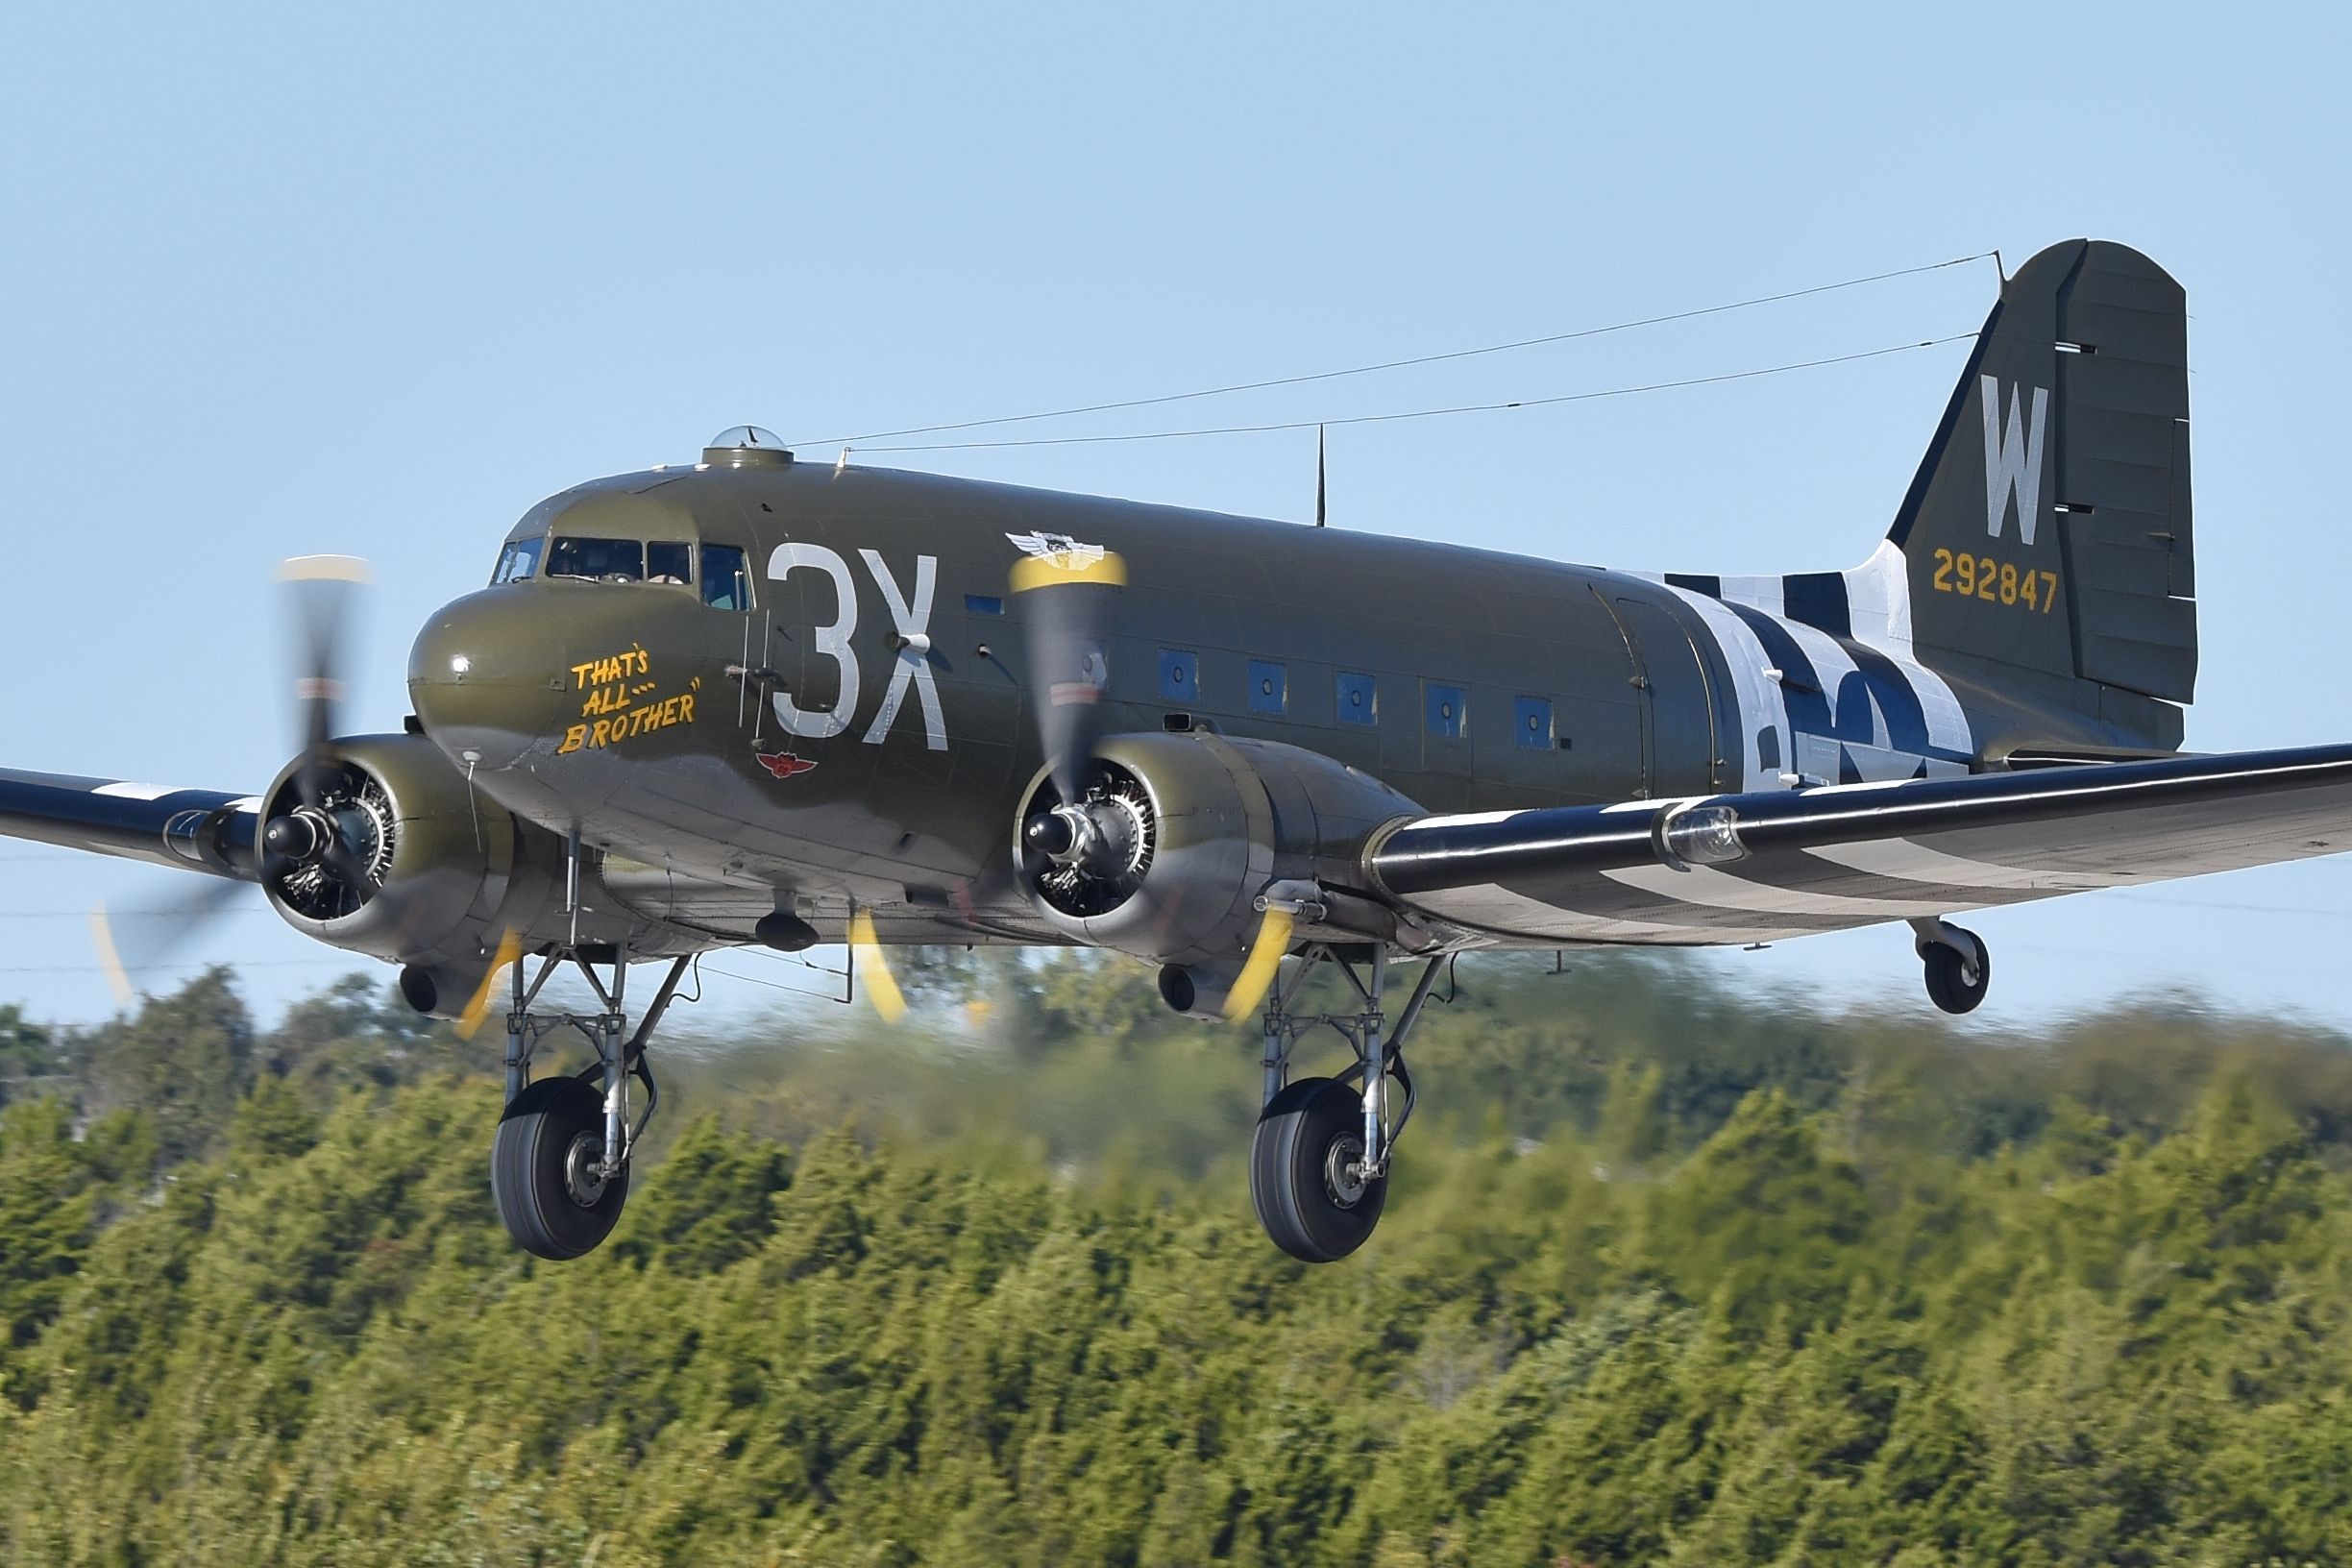 That's All Brother Douglas C-47 Skytrain flying low to the ground.